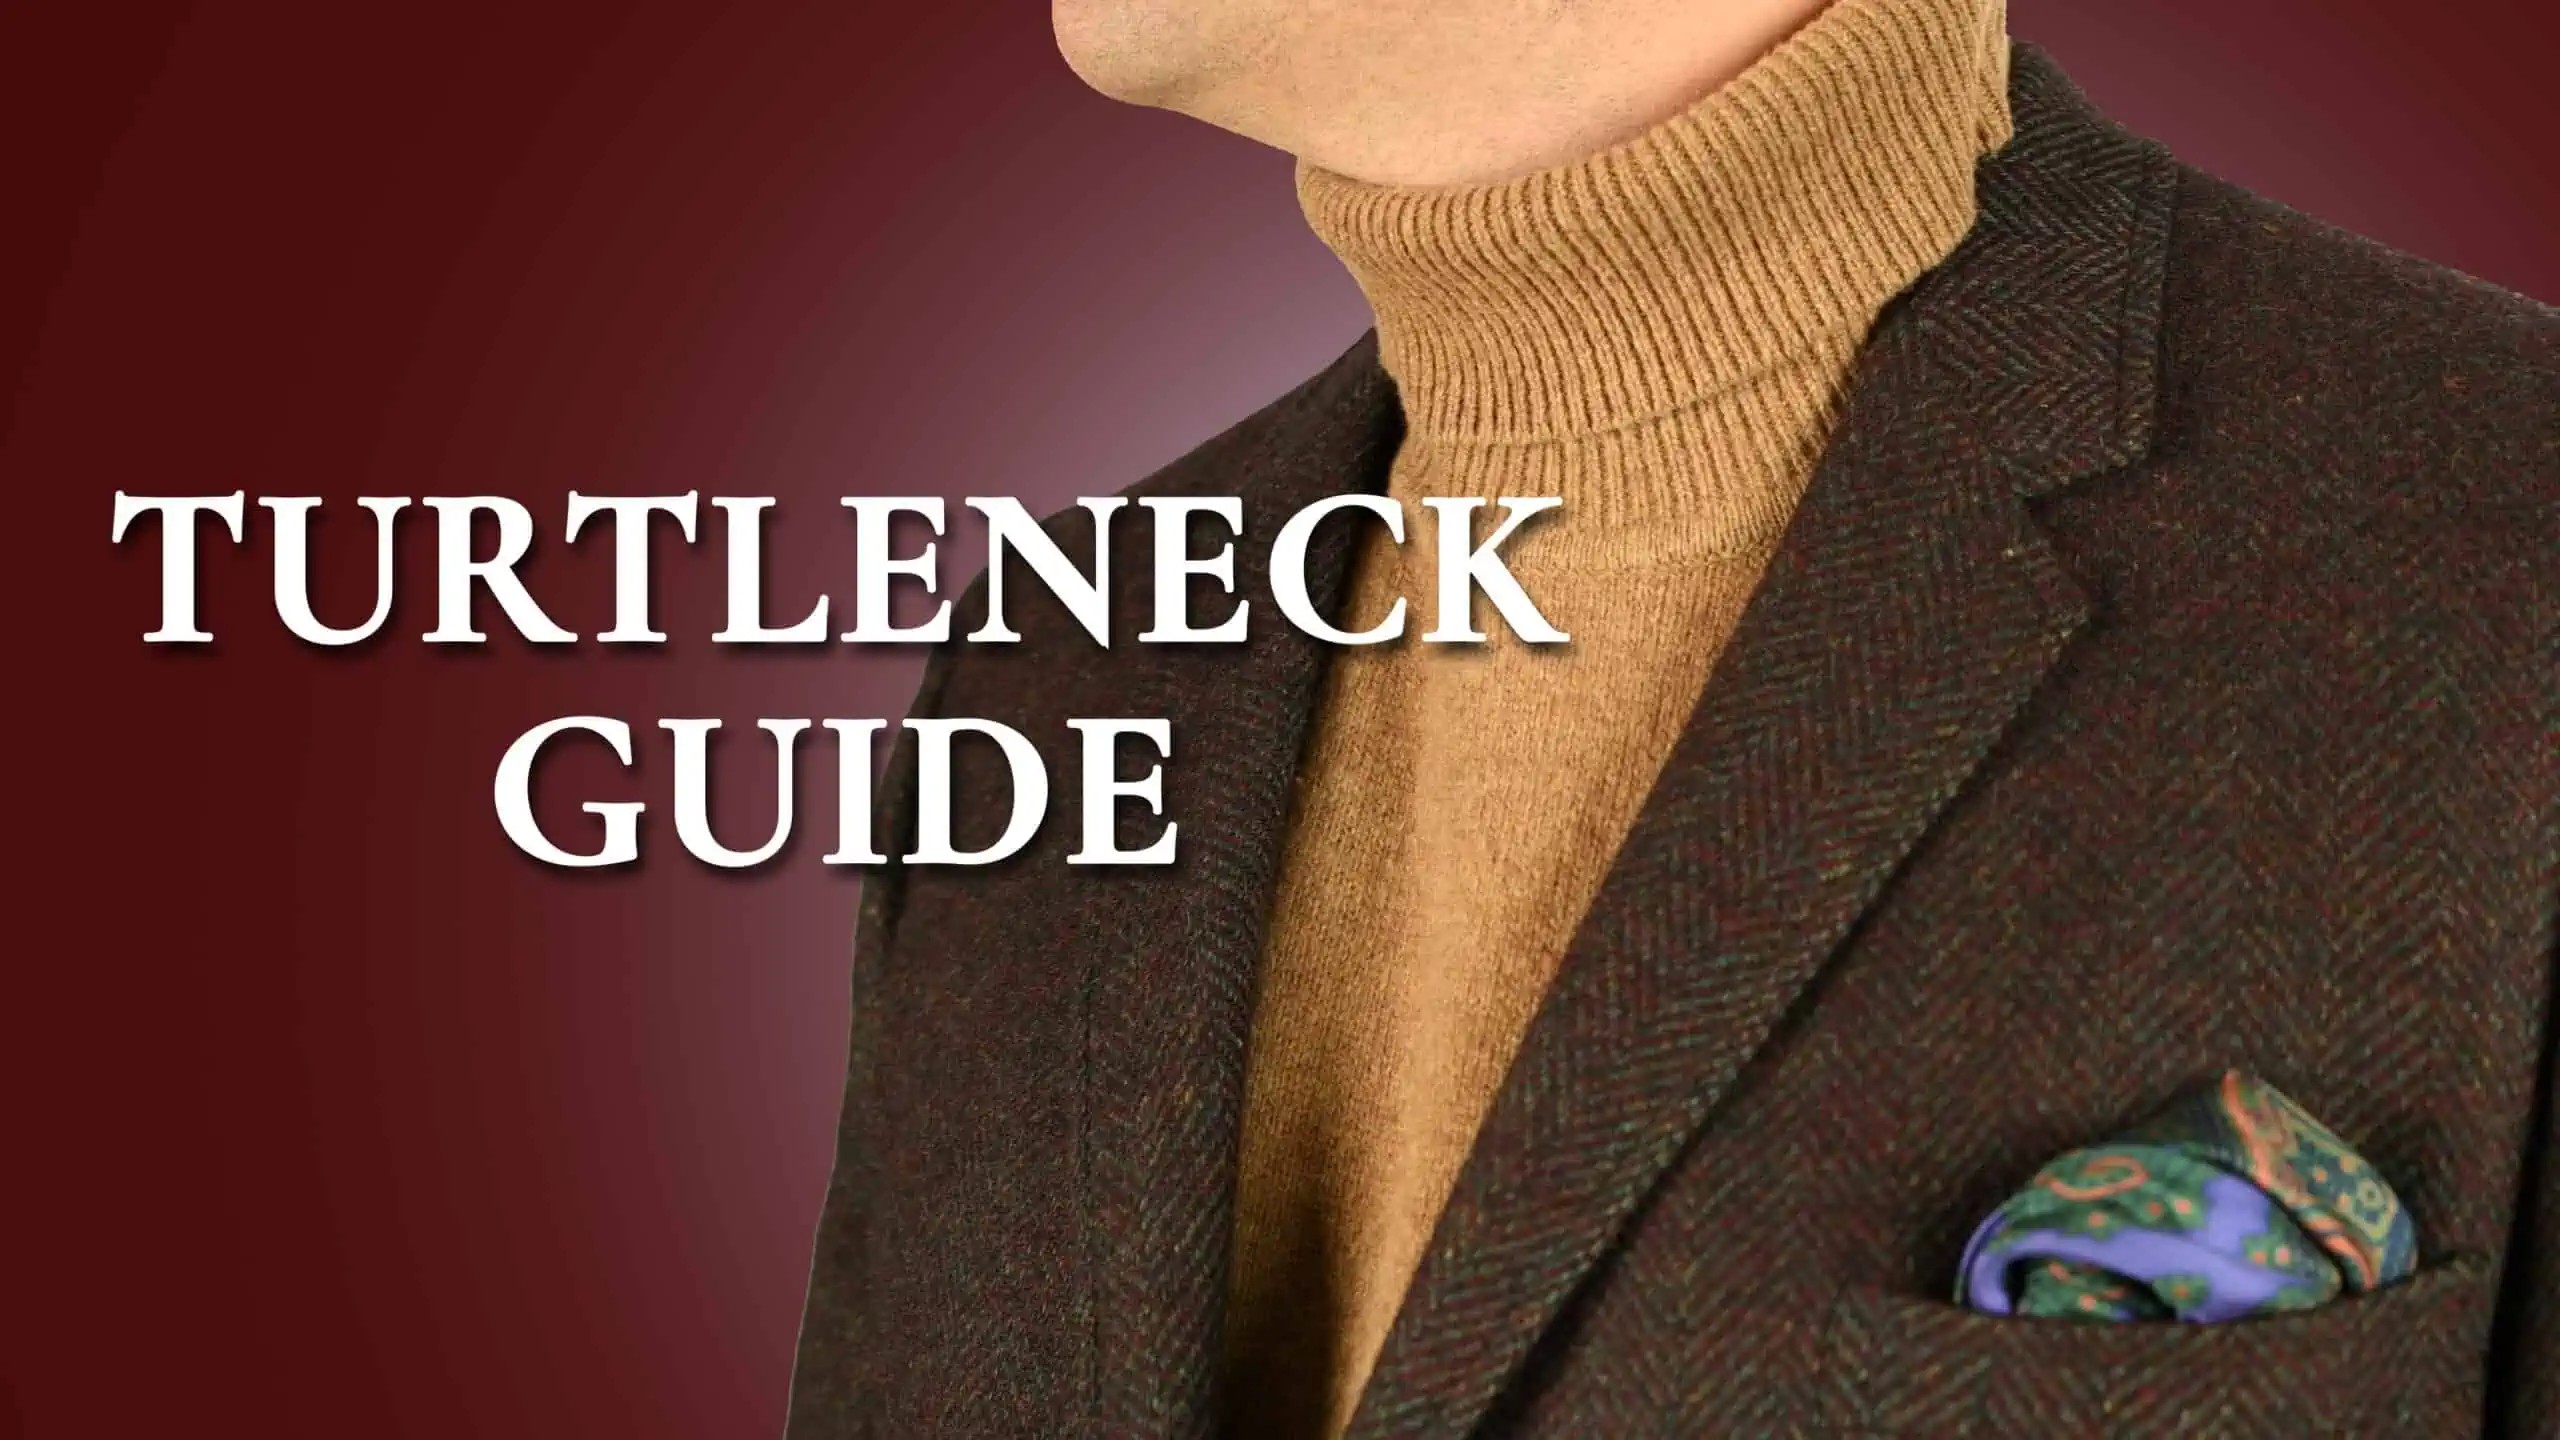 Tie Clips: Beginners Guide to Suave Style